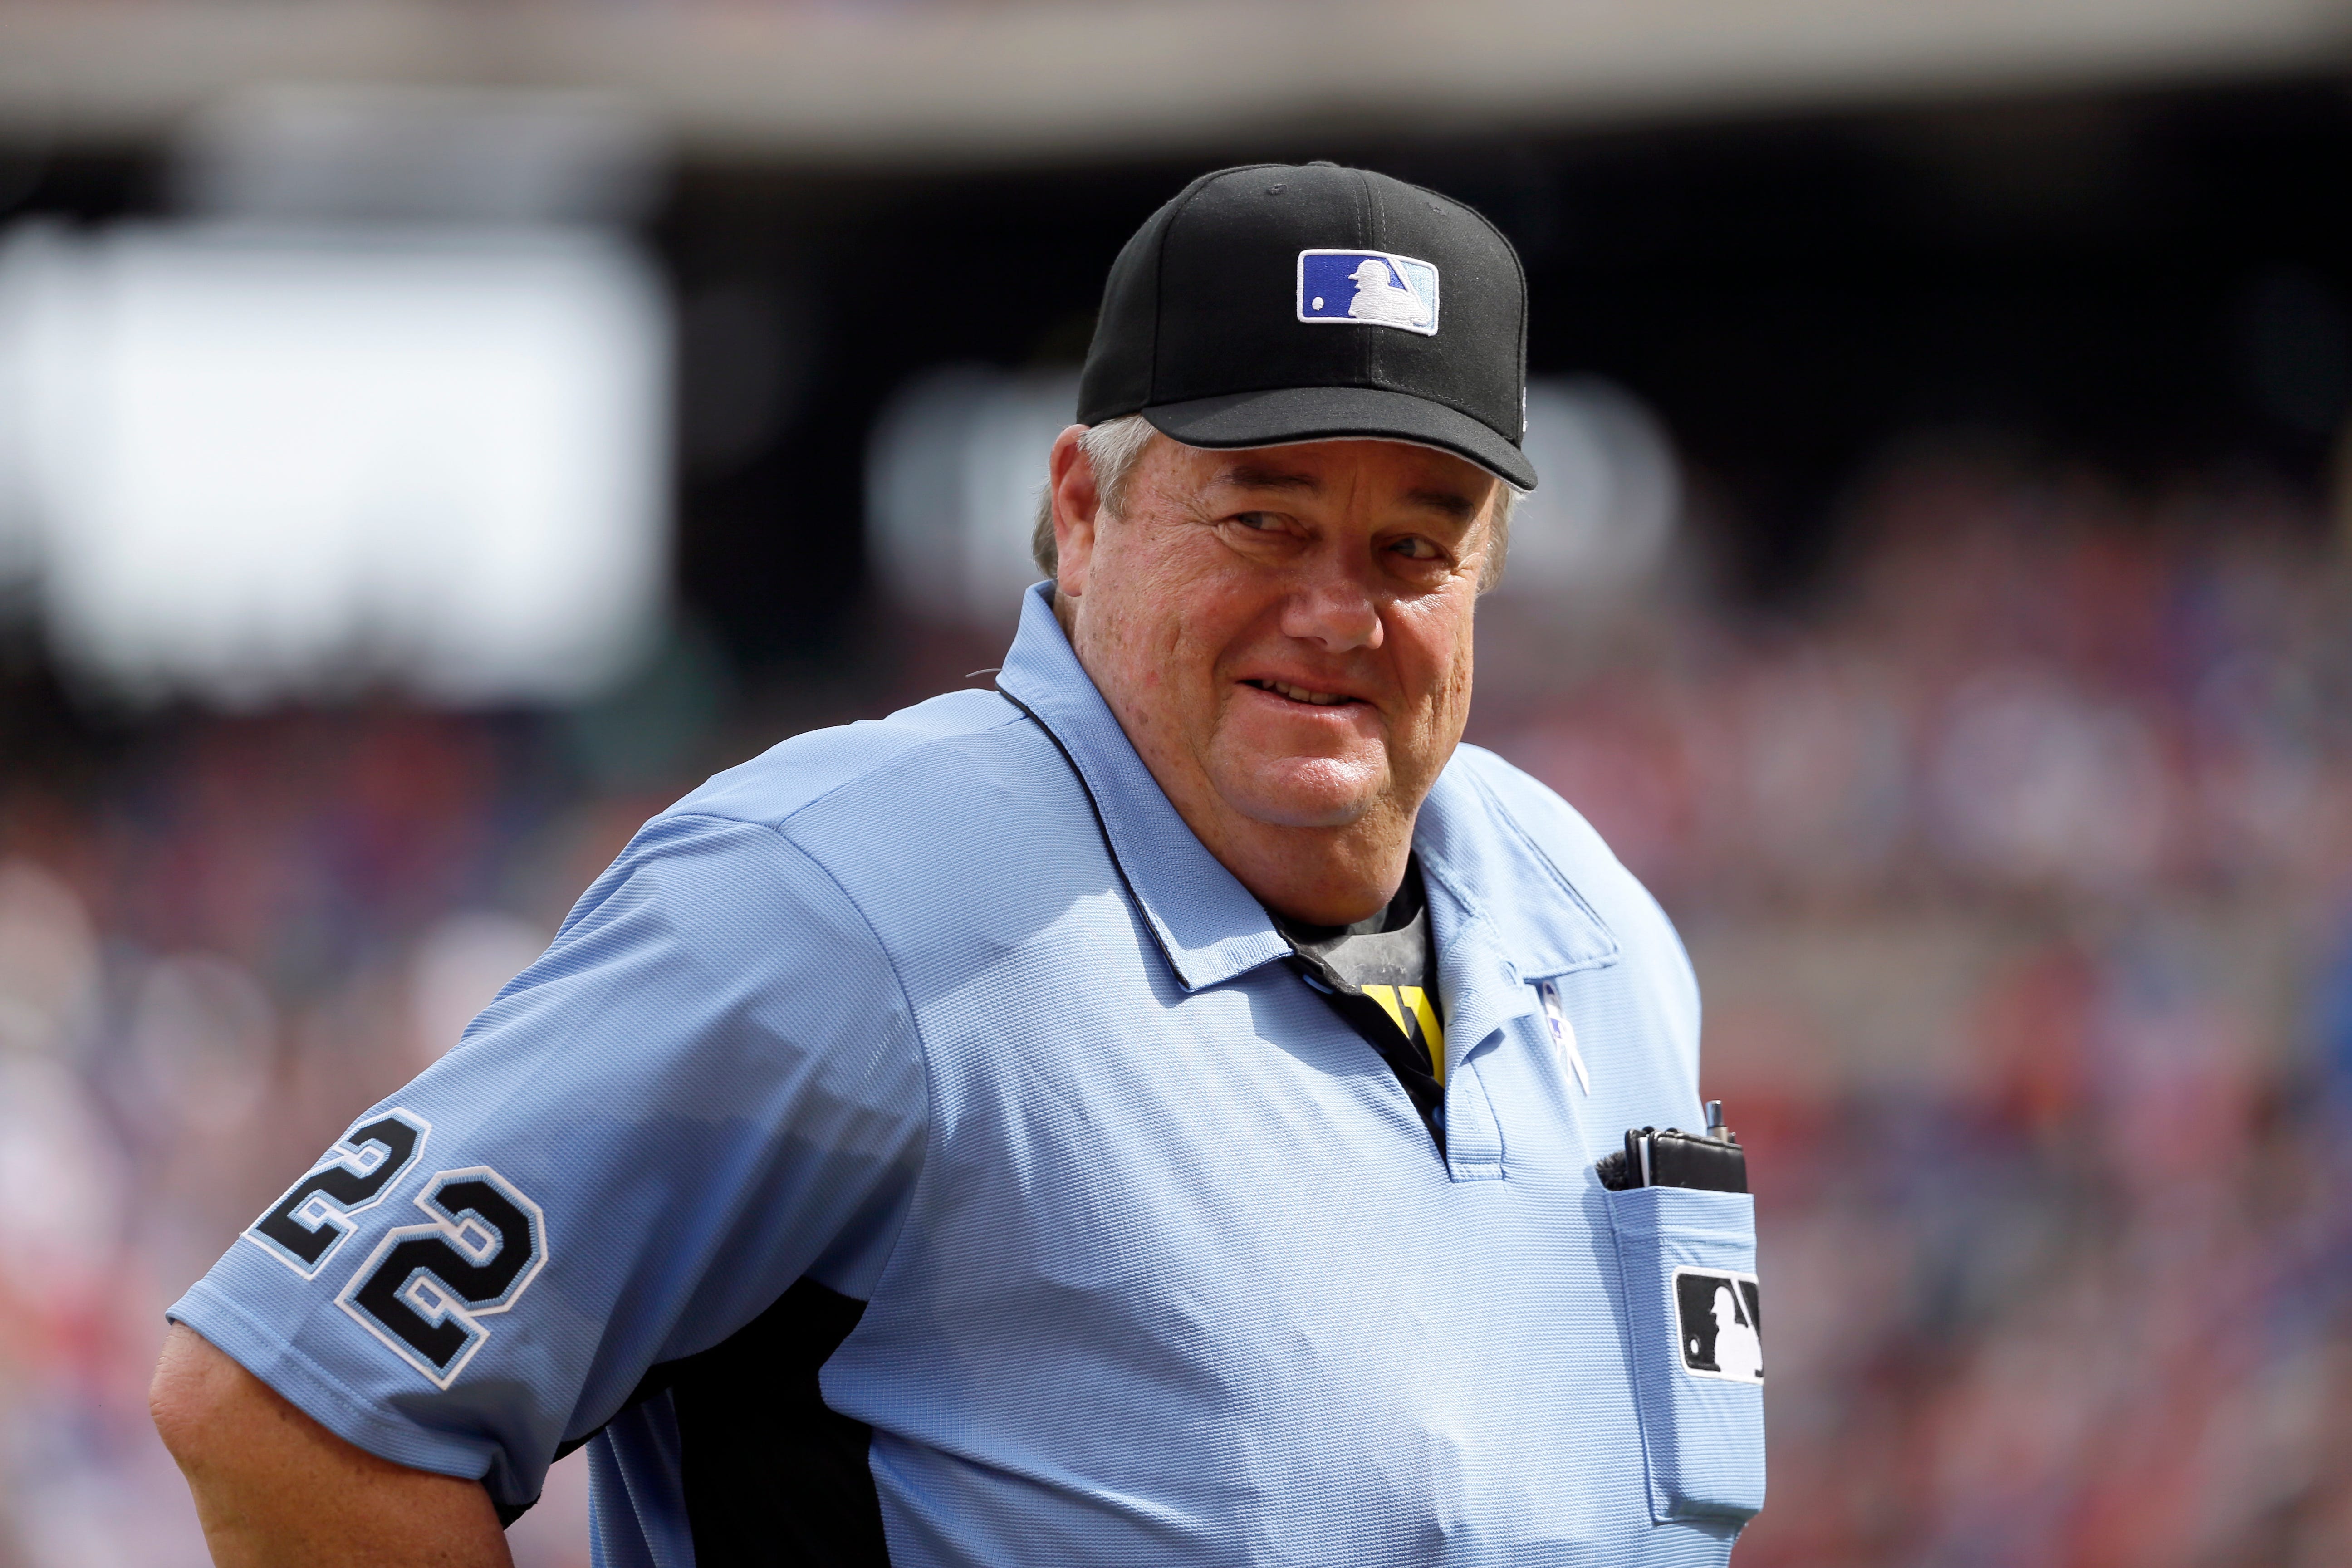 Legendary umpire Joe West dishes on players, managers and replay at 5,000th game